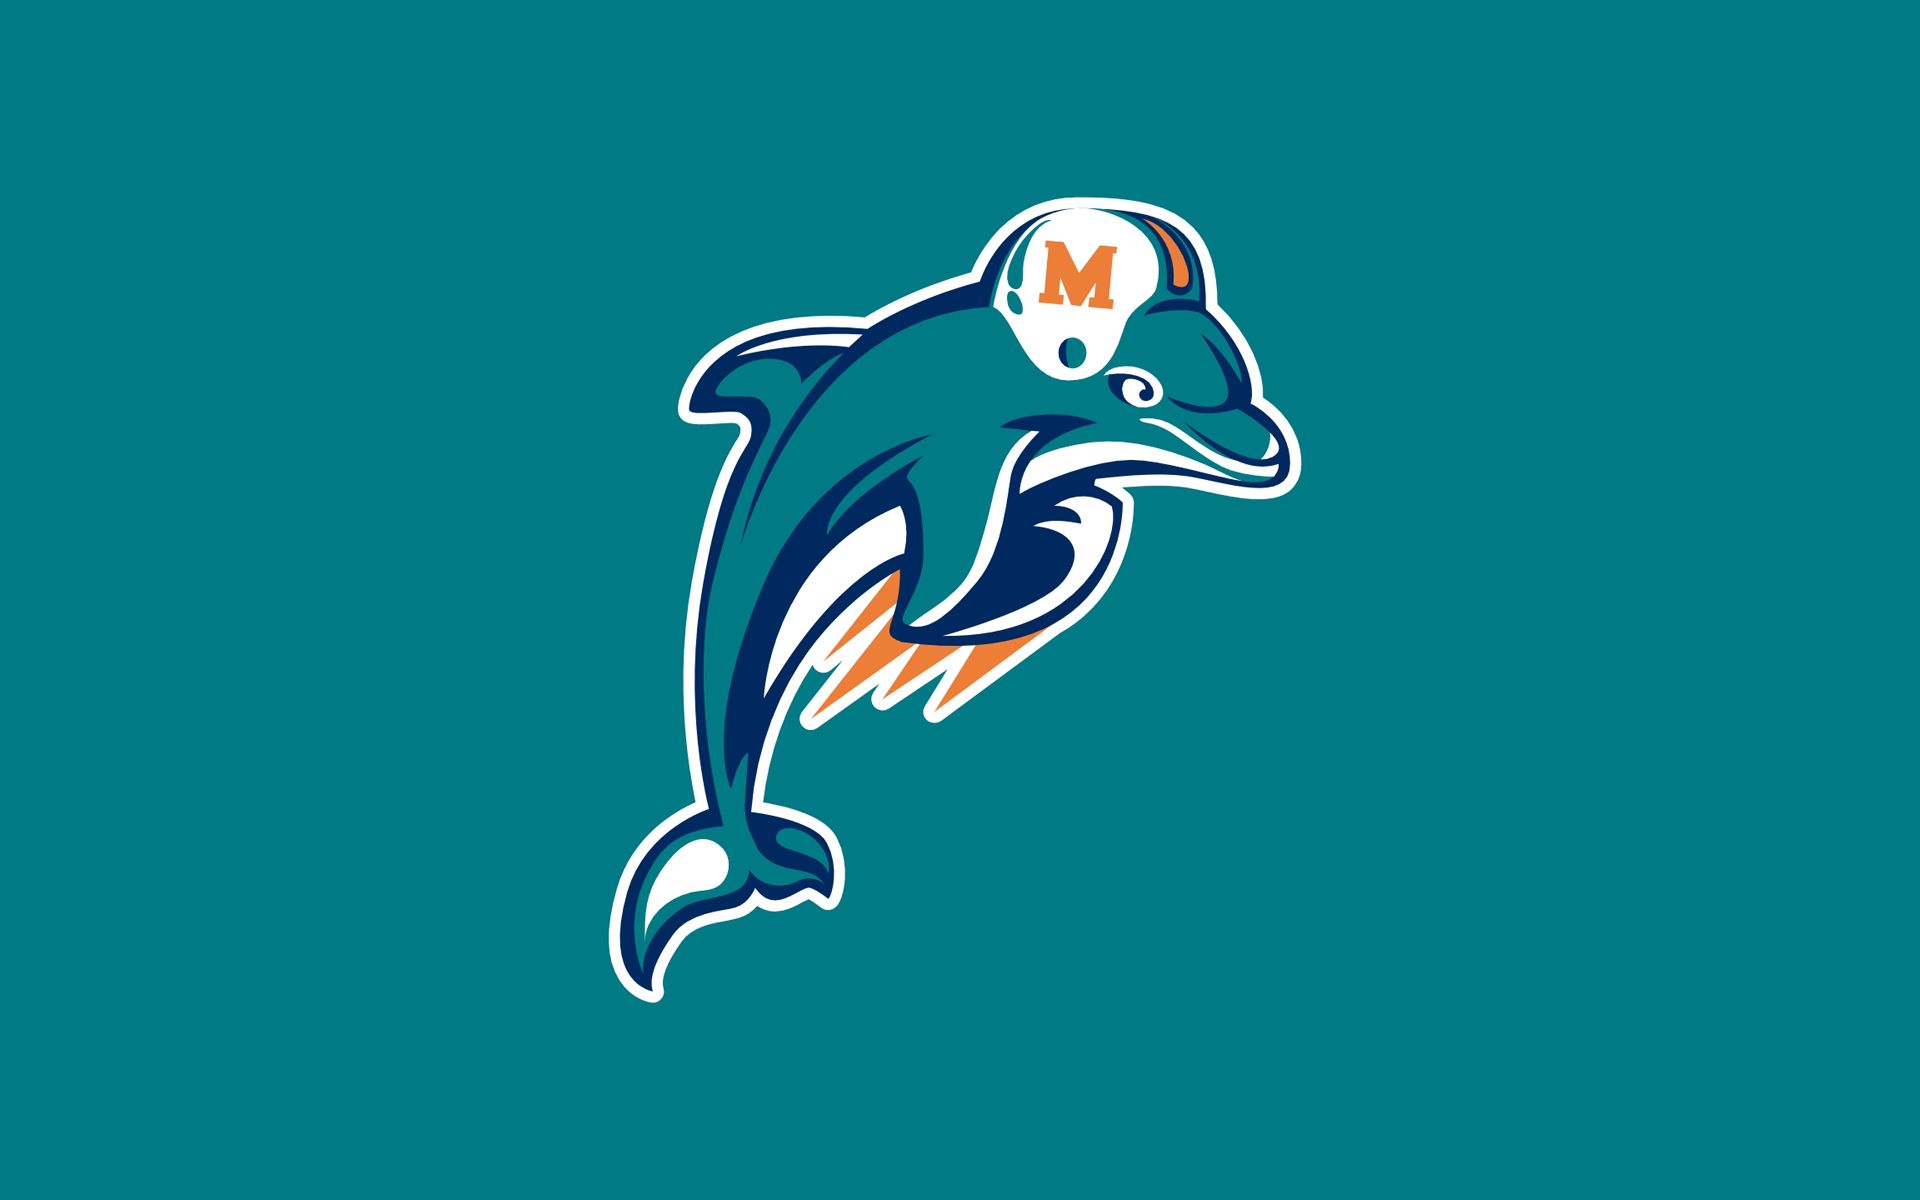 Miami Dolphins Wallpaper 201314 by tmarried on DeviantArt